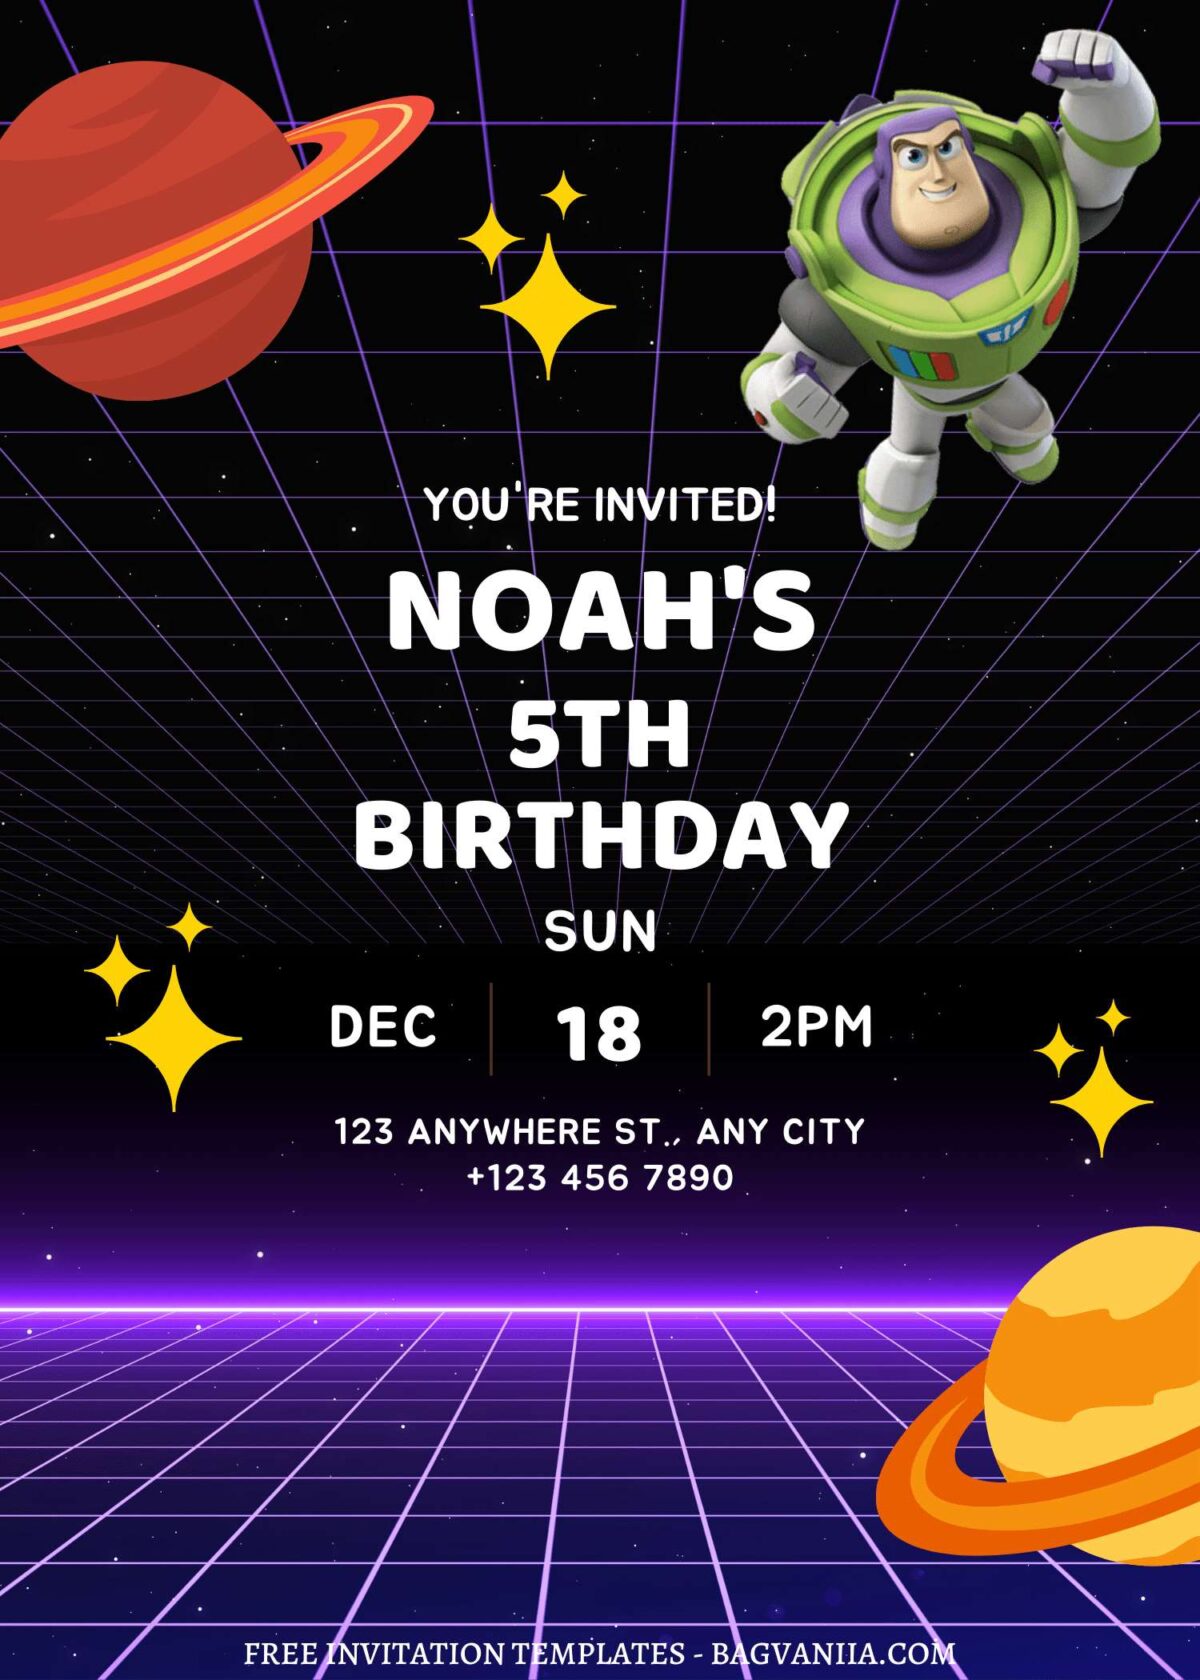 FREE EDITABLE - 8+ Space Ranger Buzz Canva Birthday Invitation Templates  with Planet Saturn